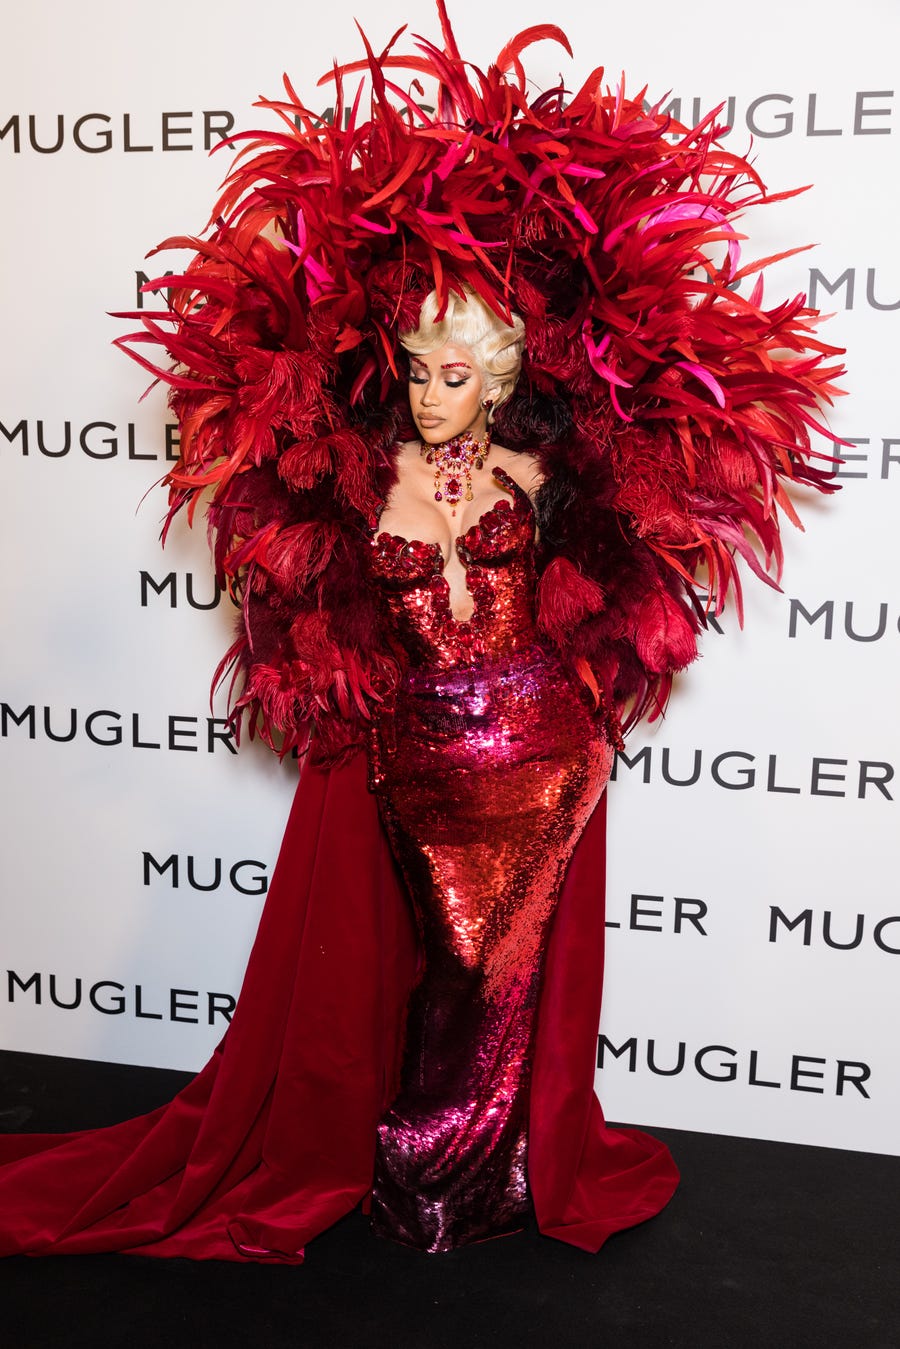 PARIS, FRANCE - SEPTEMBER 28: Cardi B attends the "Thierry Mugler : Couturissime" Photocall as part of Paris Fashion Week at Musee Des Arts Decoratifs on September 28, 2021 in Paris, France. (Photo by Richard Bord/WireImage ) ORG XMIT: 775717337 ORIG FILE ID: 1343633569